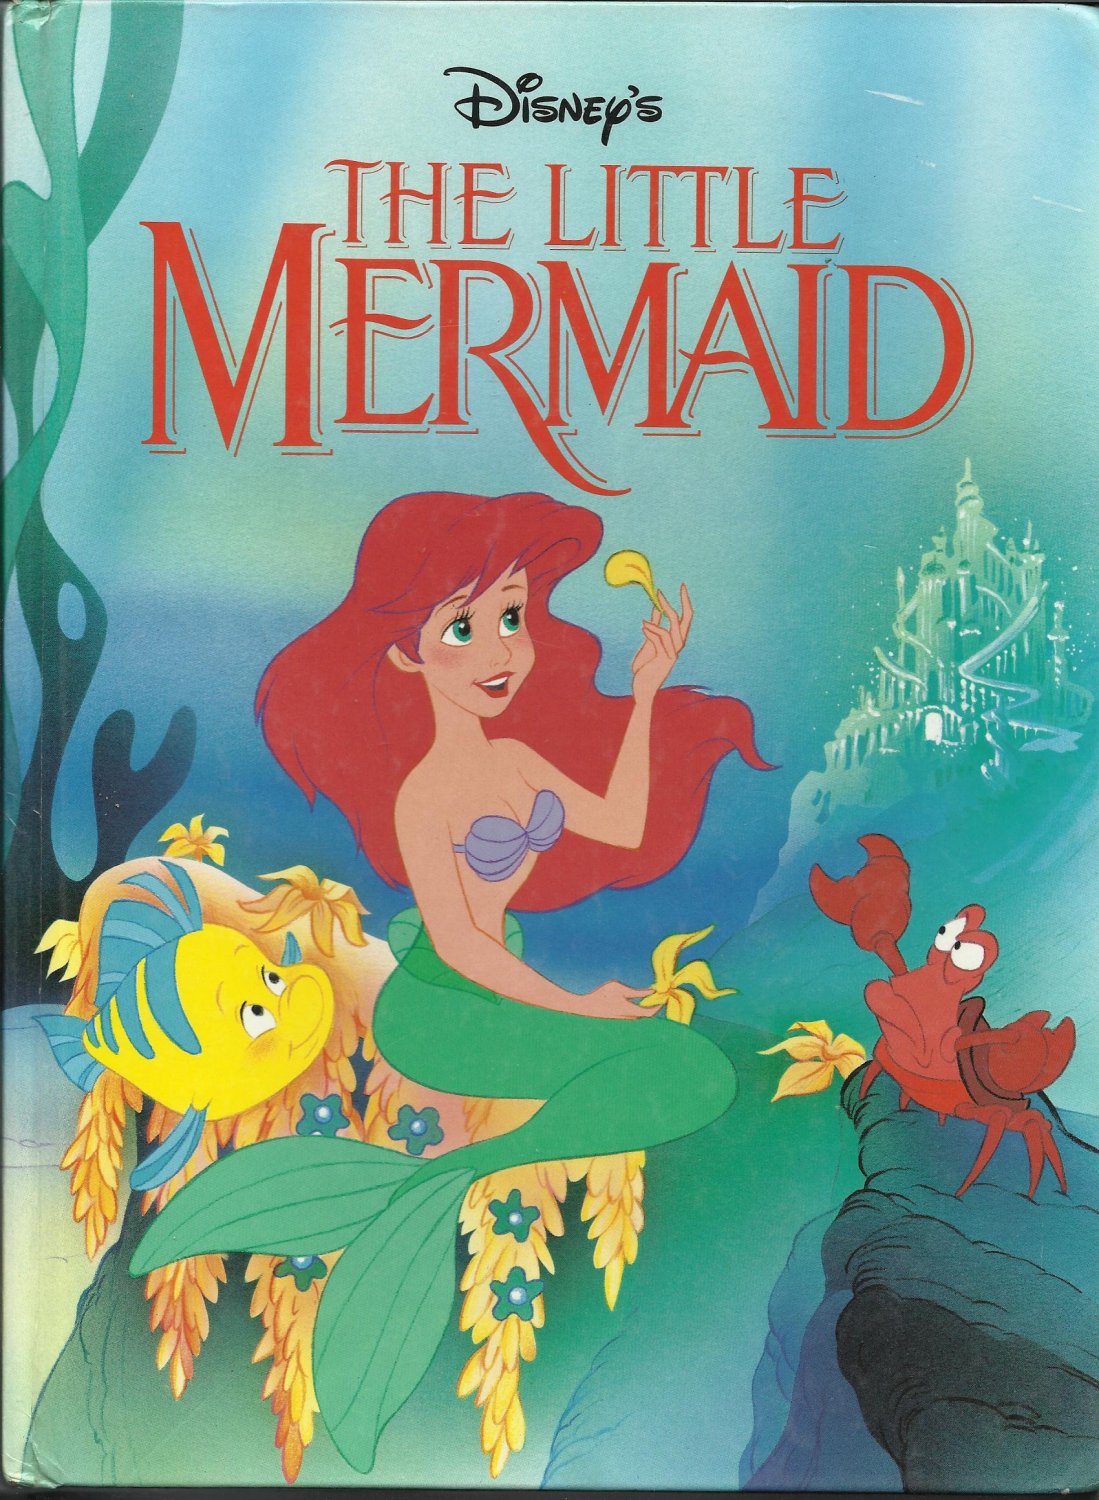 "The Little Mermaid" Hardcover Book